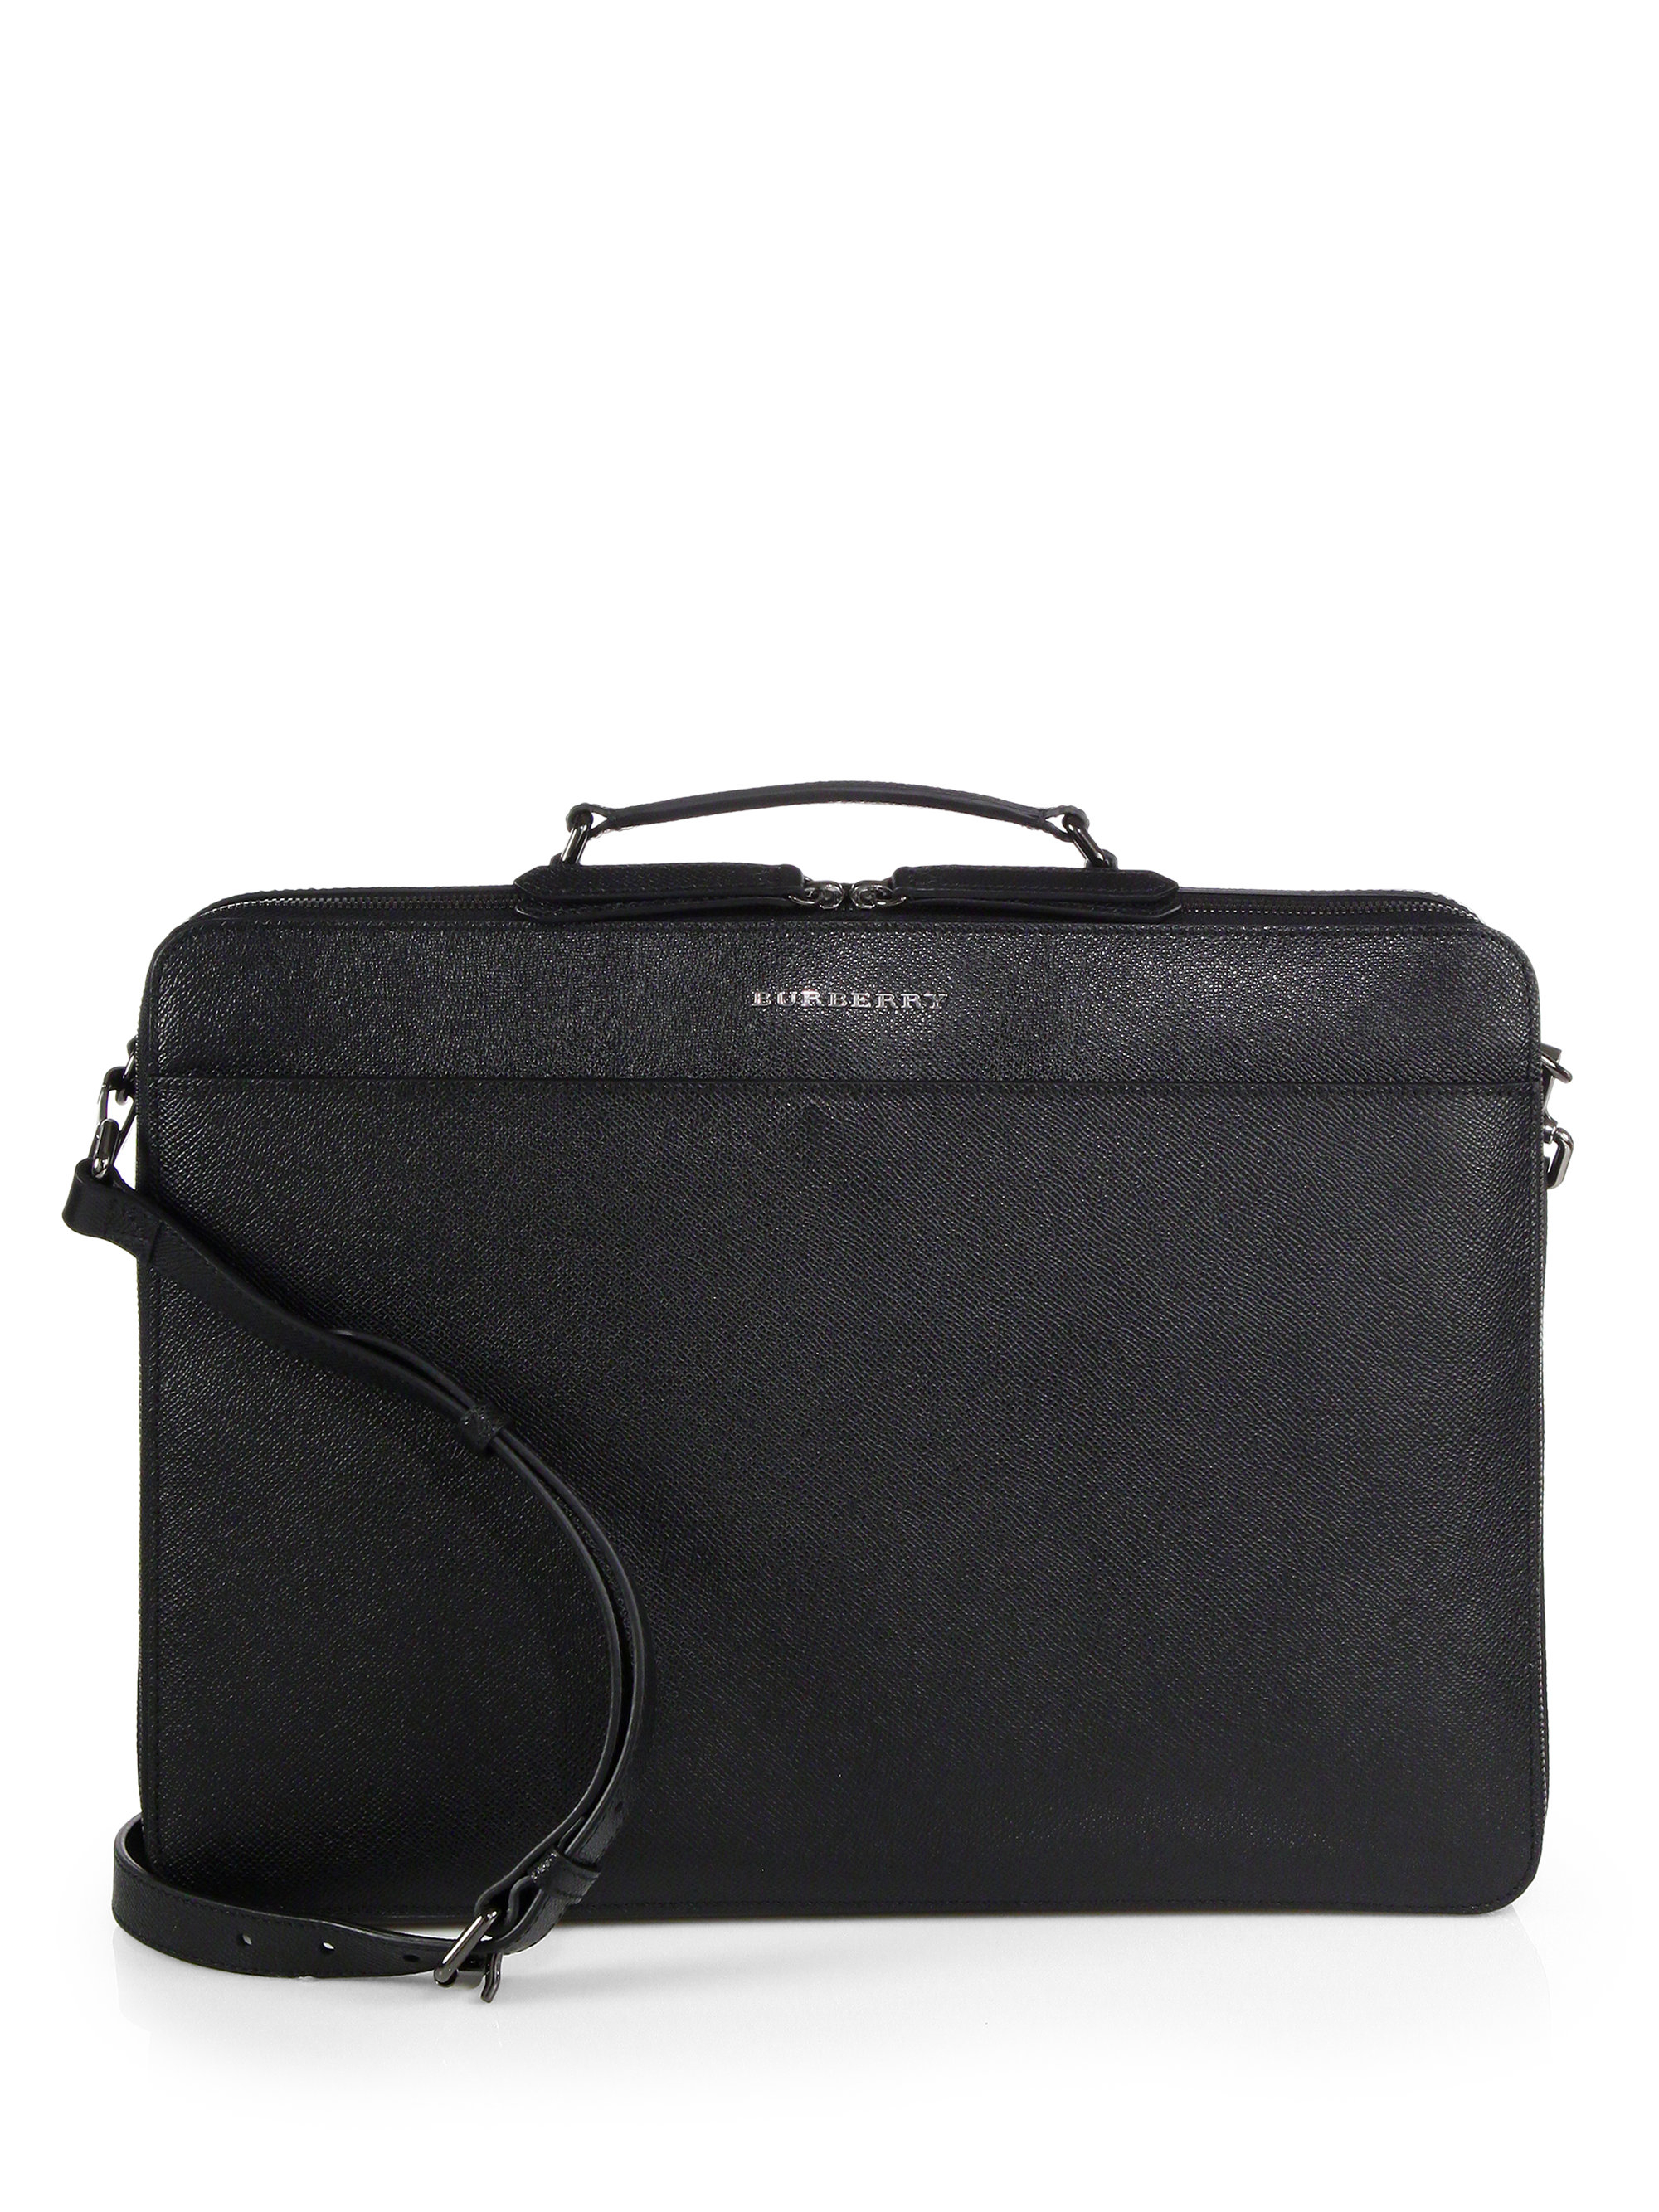 Lyst - Burberry Computer Business Briefcase in Black for Men